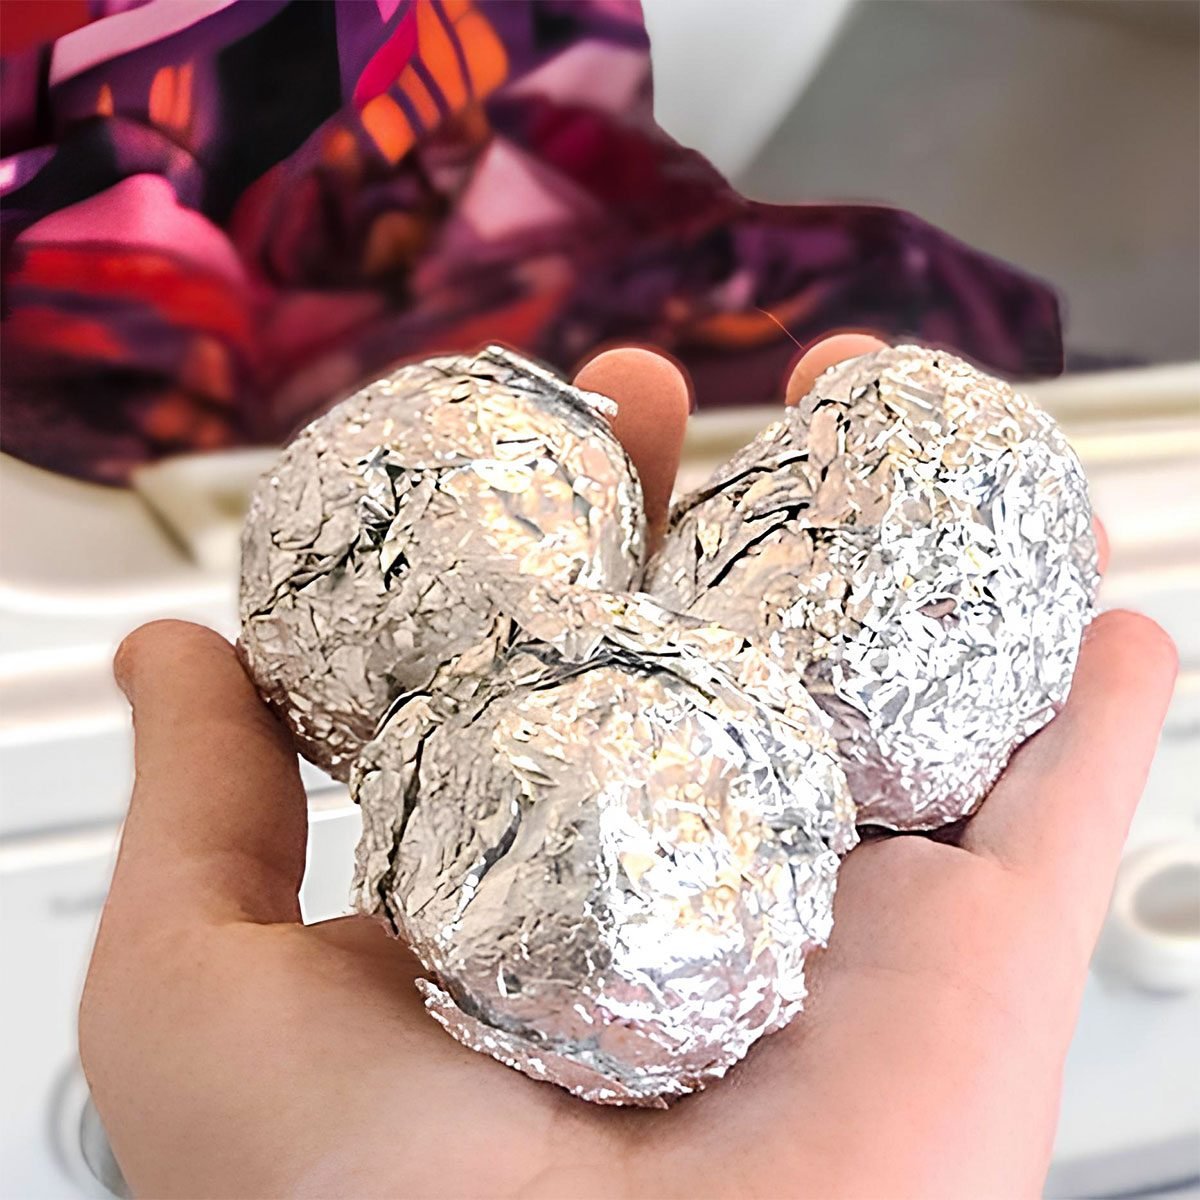 Are Tin Foil And Aluminum Foil The Same Thing?